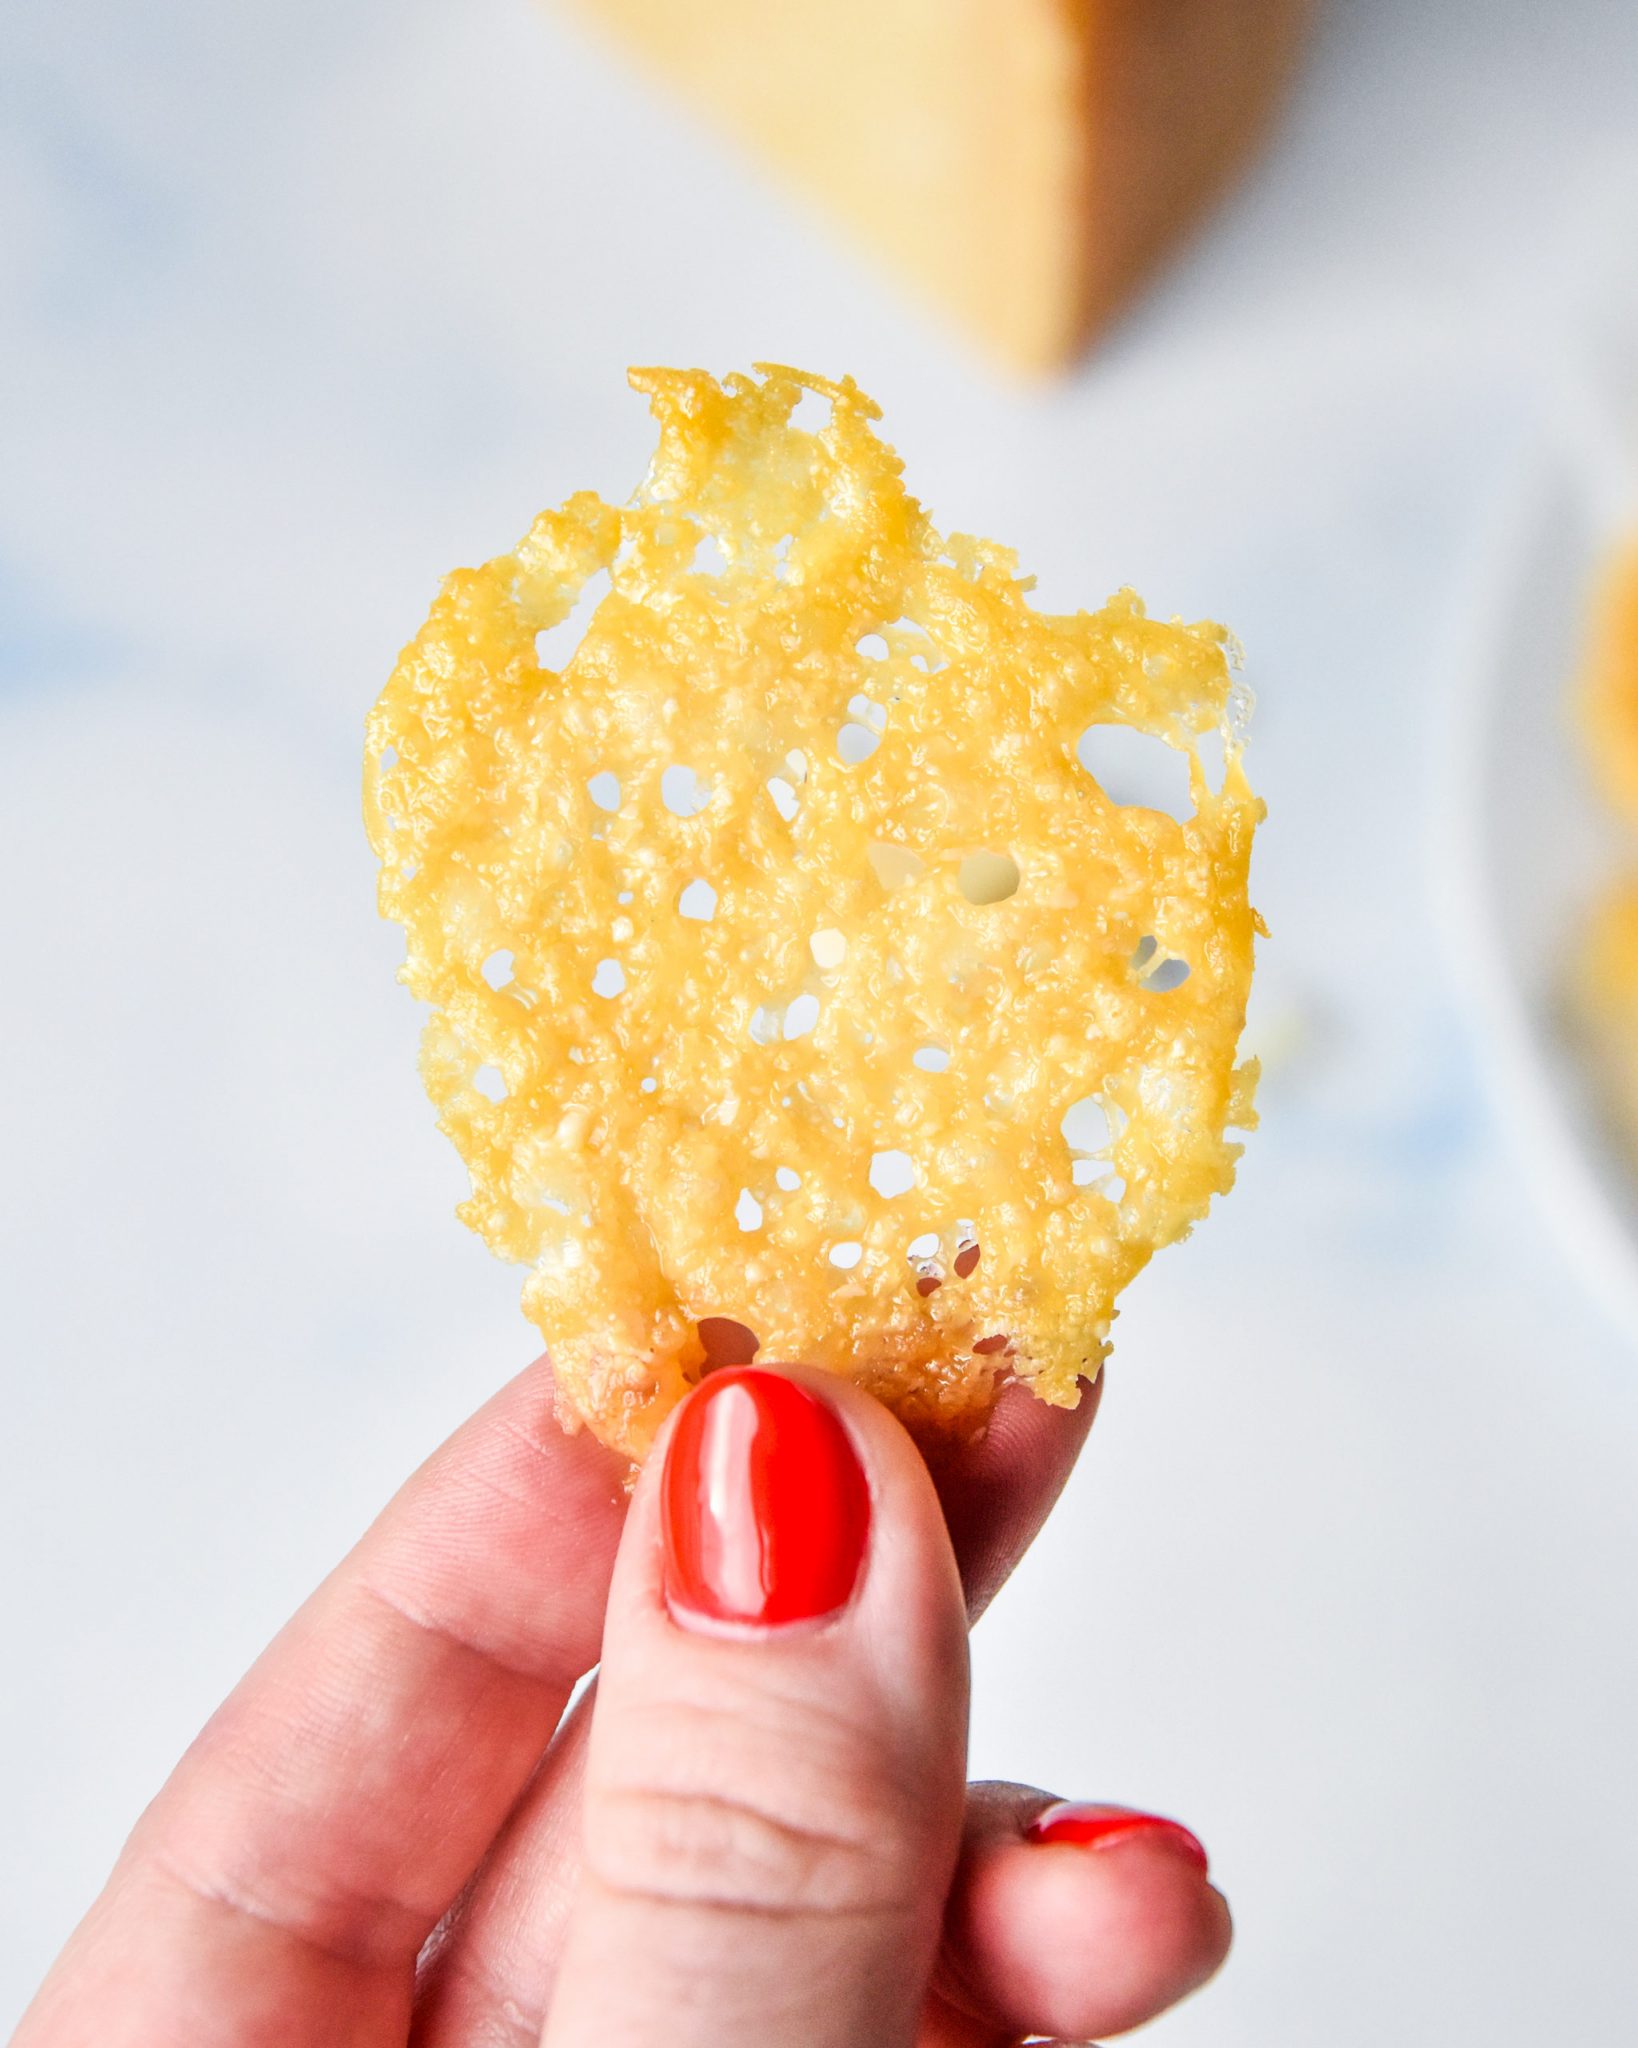 How to Make Baked Parmesan Crisps - Project Meal Plan